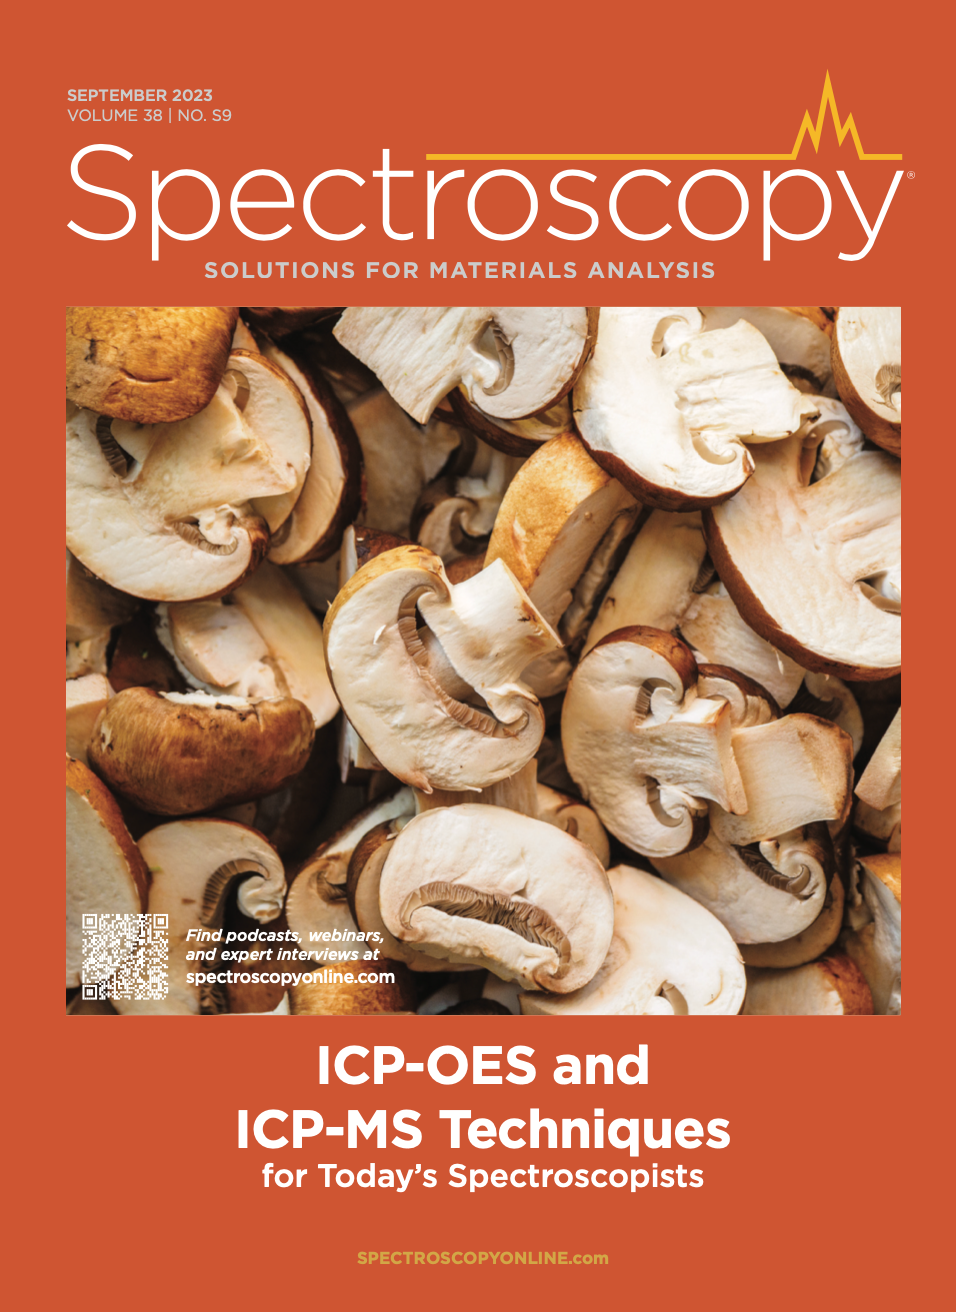 ICP-OES and ICP-MS Techniques for Today's Spectroscopists